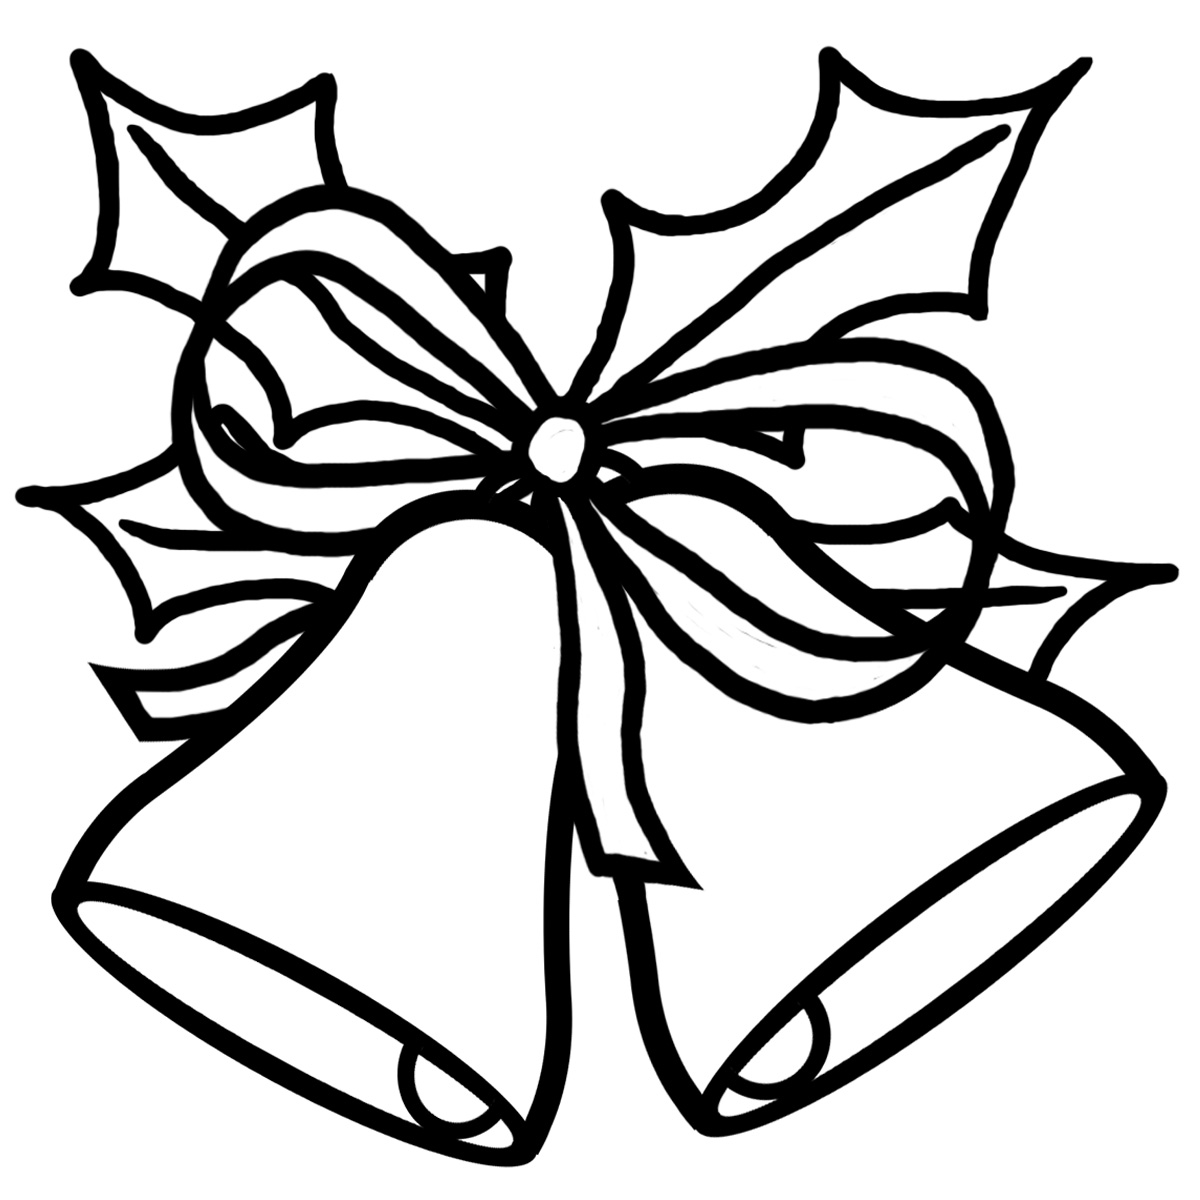 Clip Art Black And White Xmas Decorations Clipart